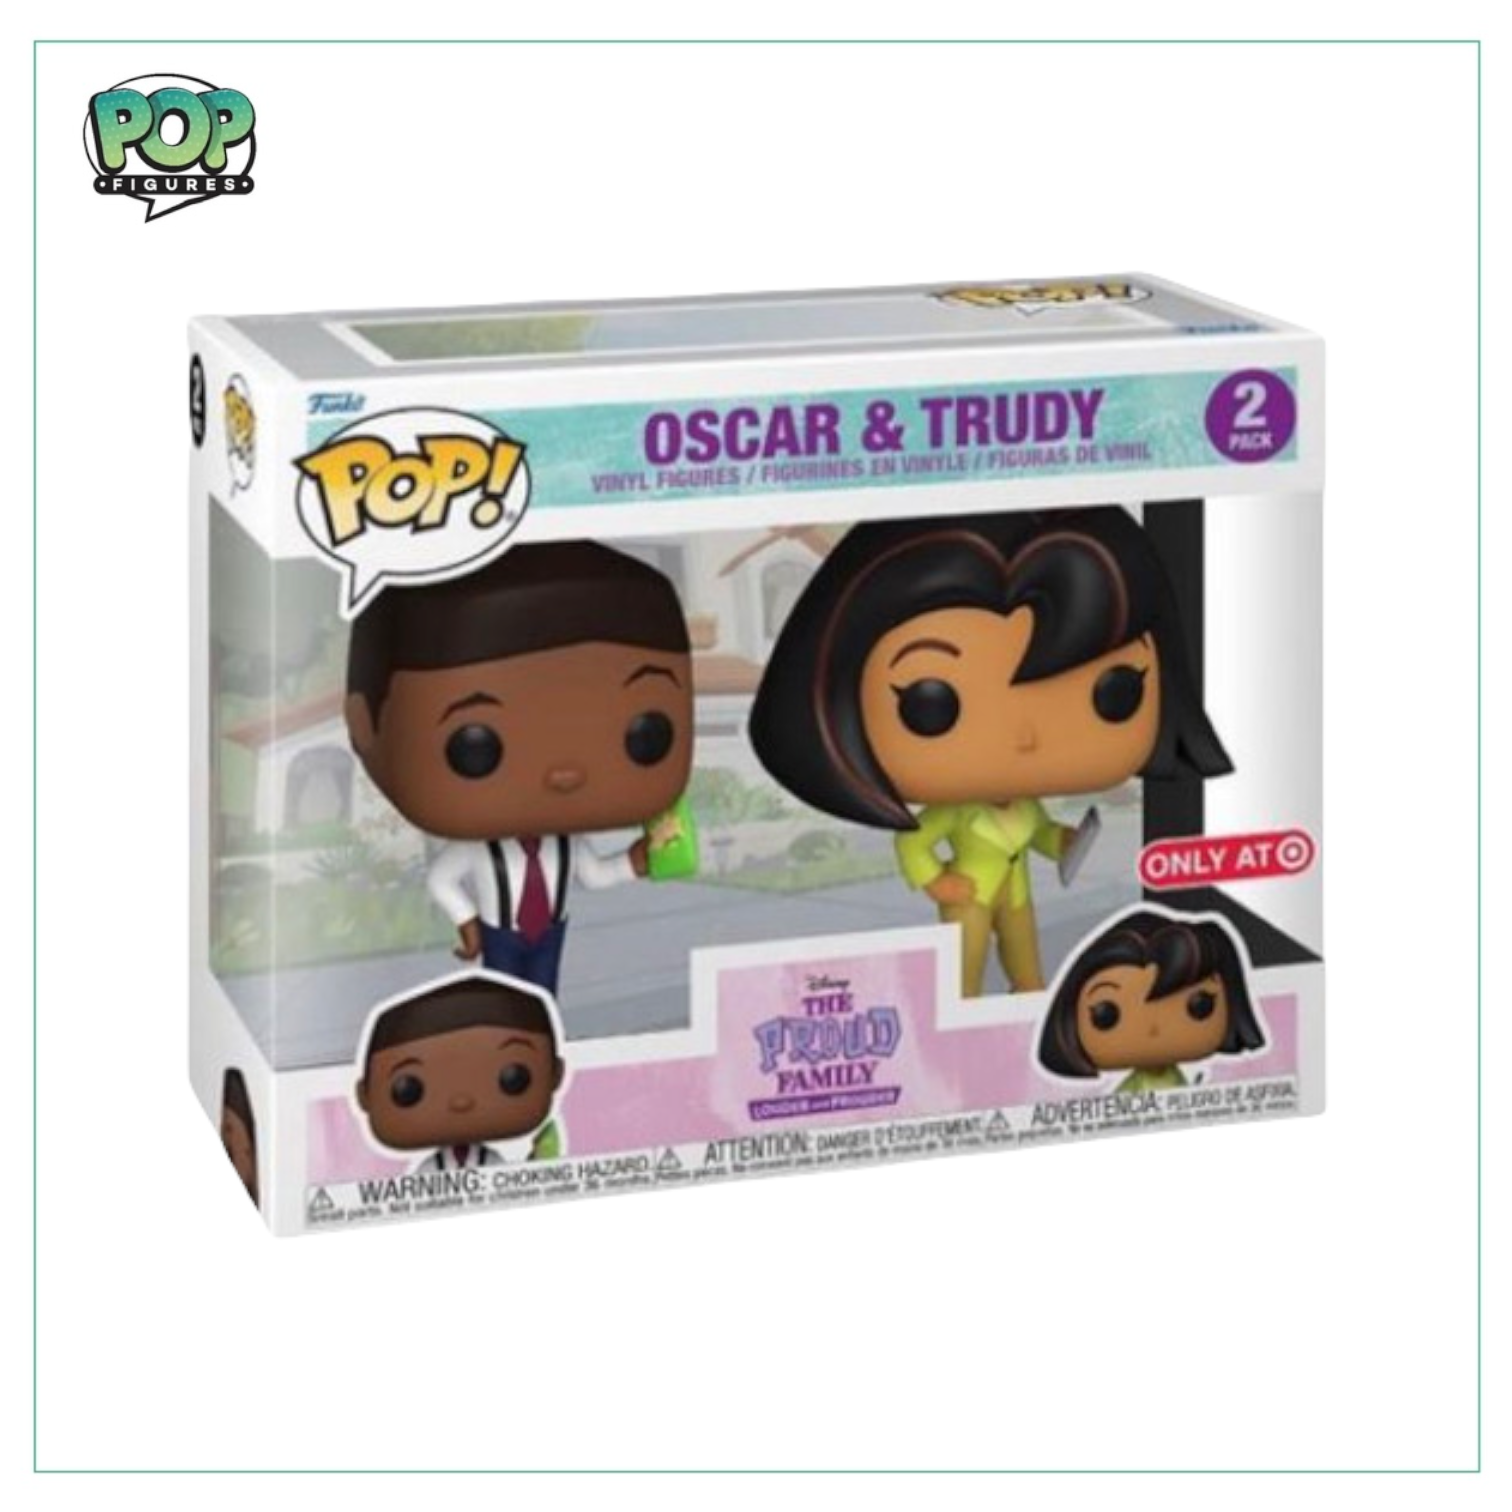 Oscar & Trudy Deluxe 2 Pack Funko Pop! The Proud Family - Target Exclusive